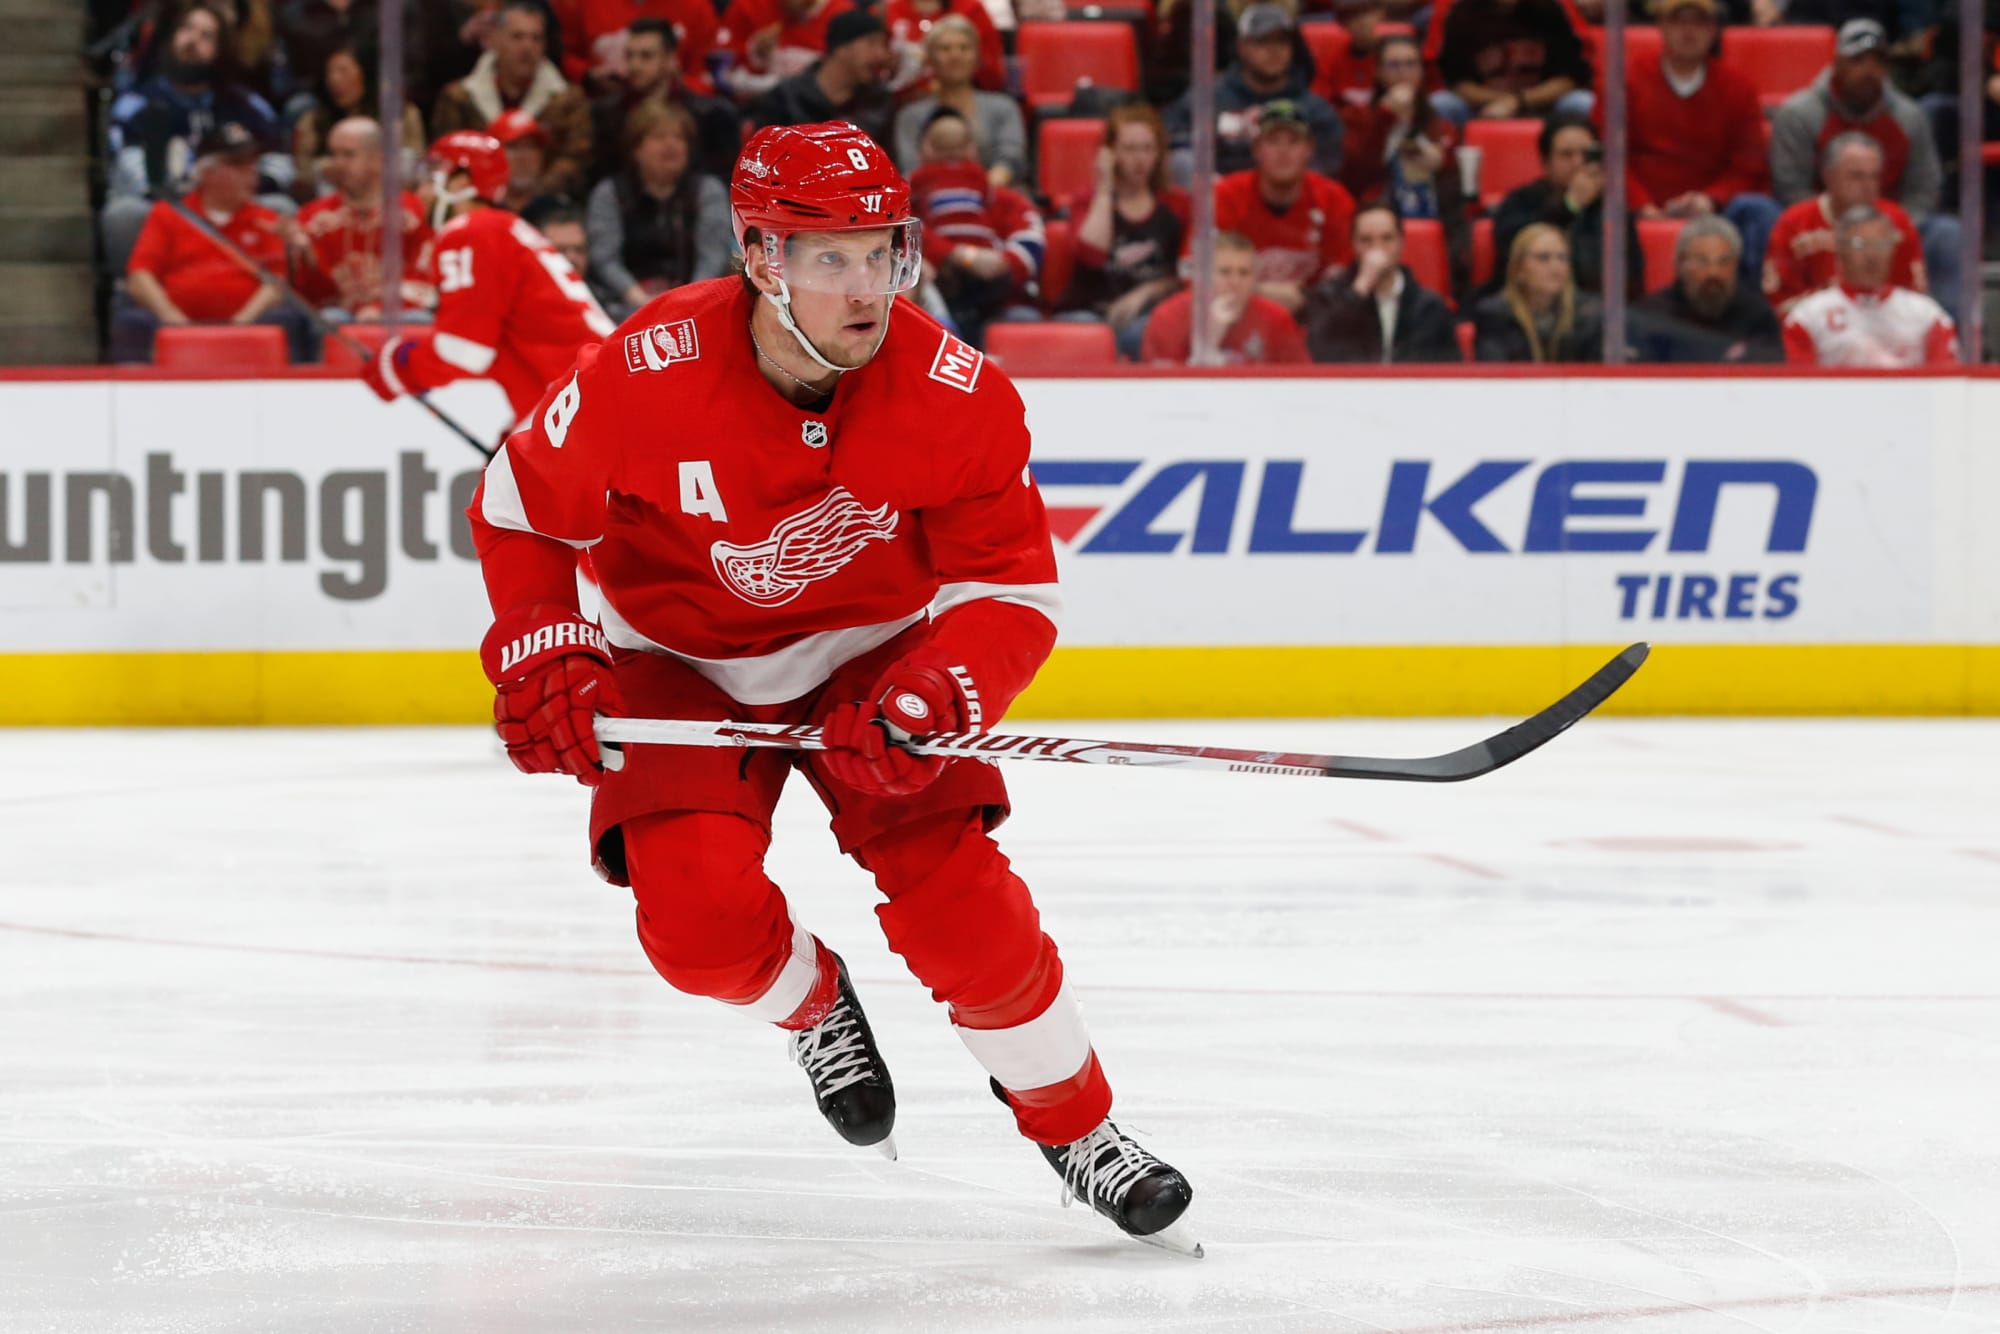 The Detroit Red Wings need Justin Abdelkader to start producing